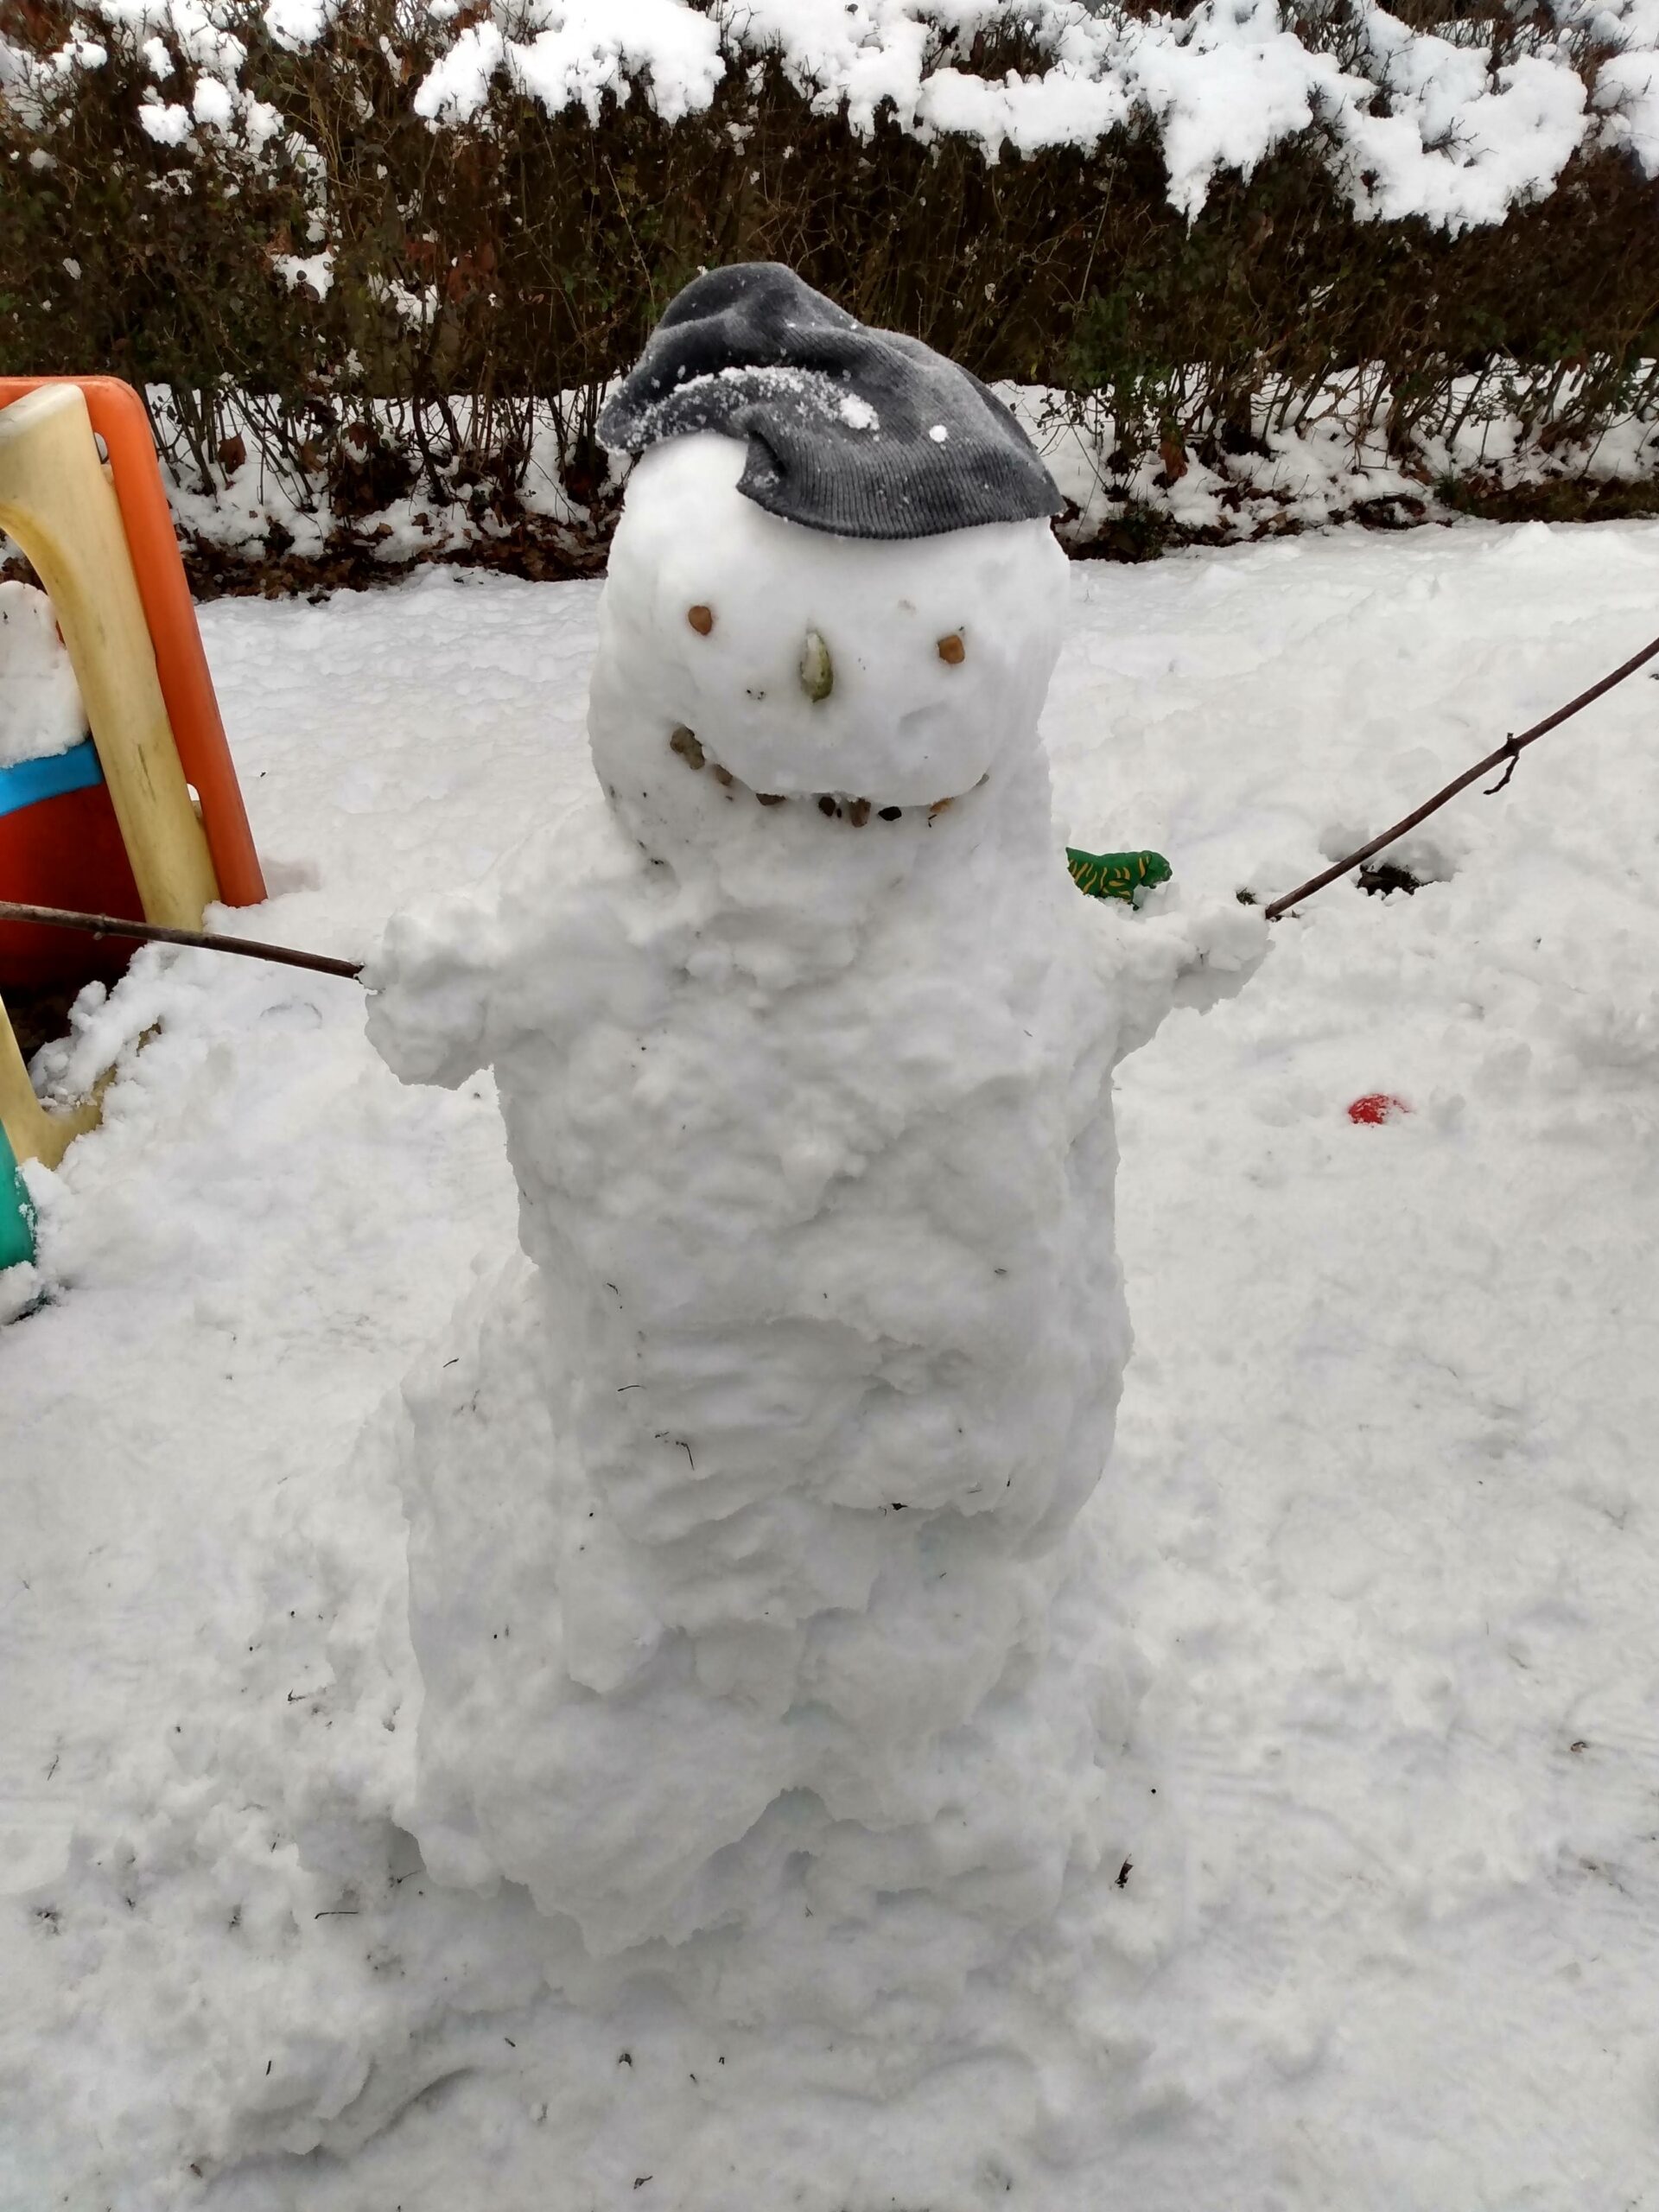 A friendly snowman with outstretched arms.